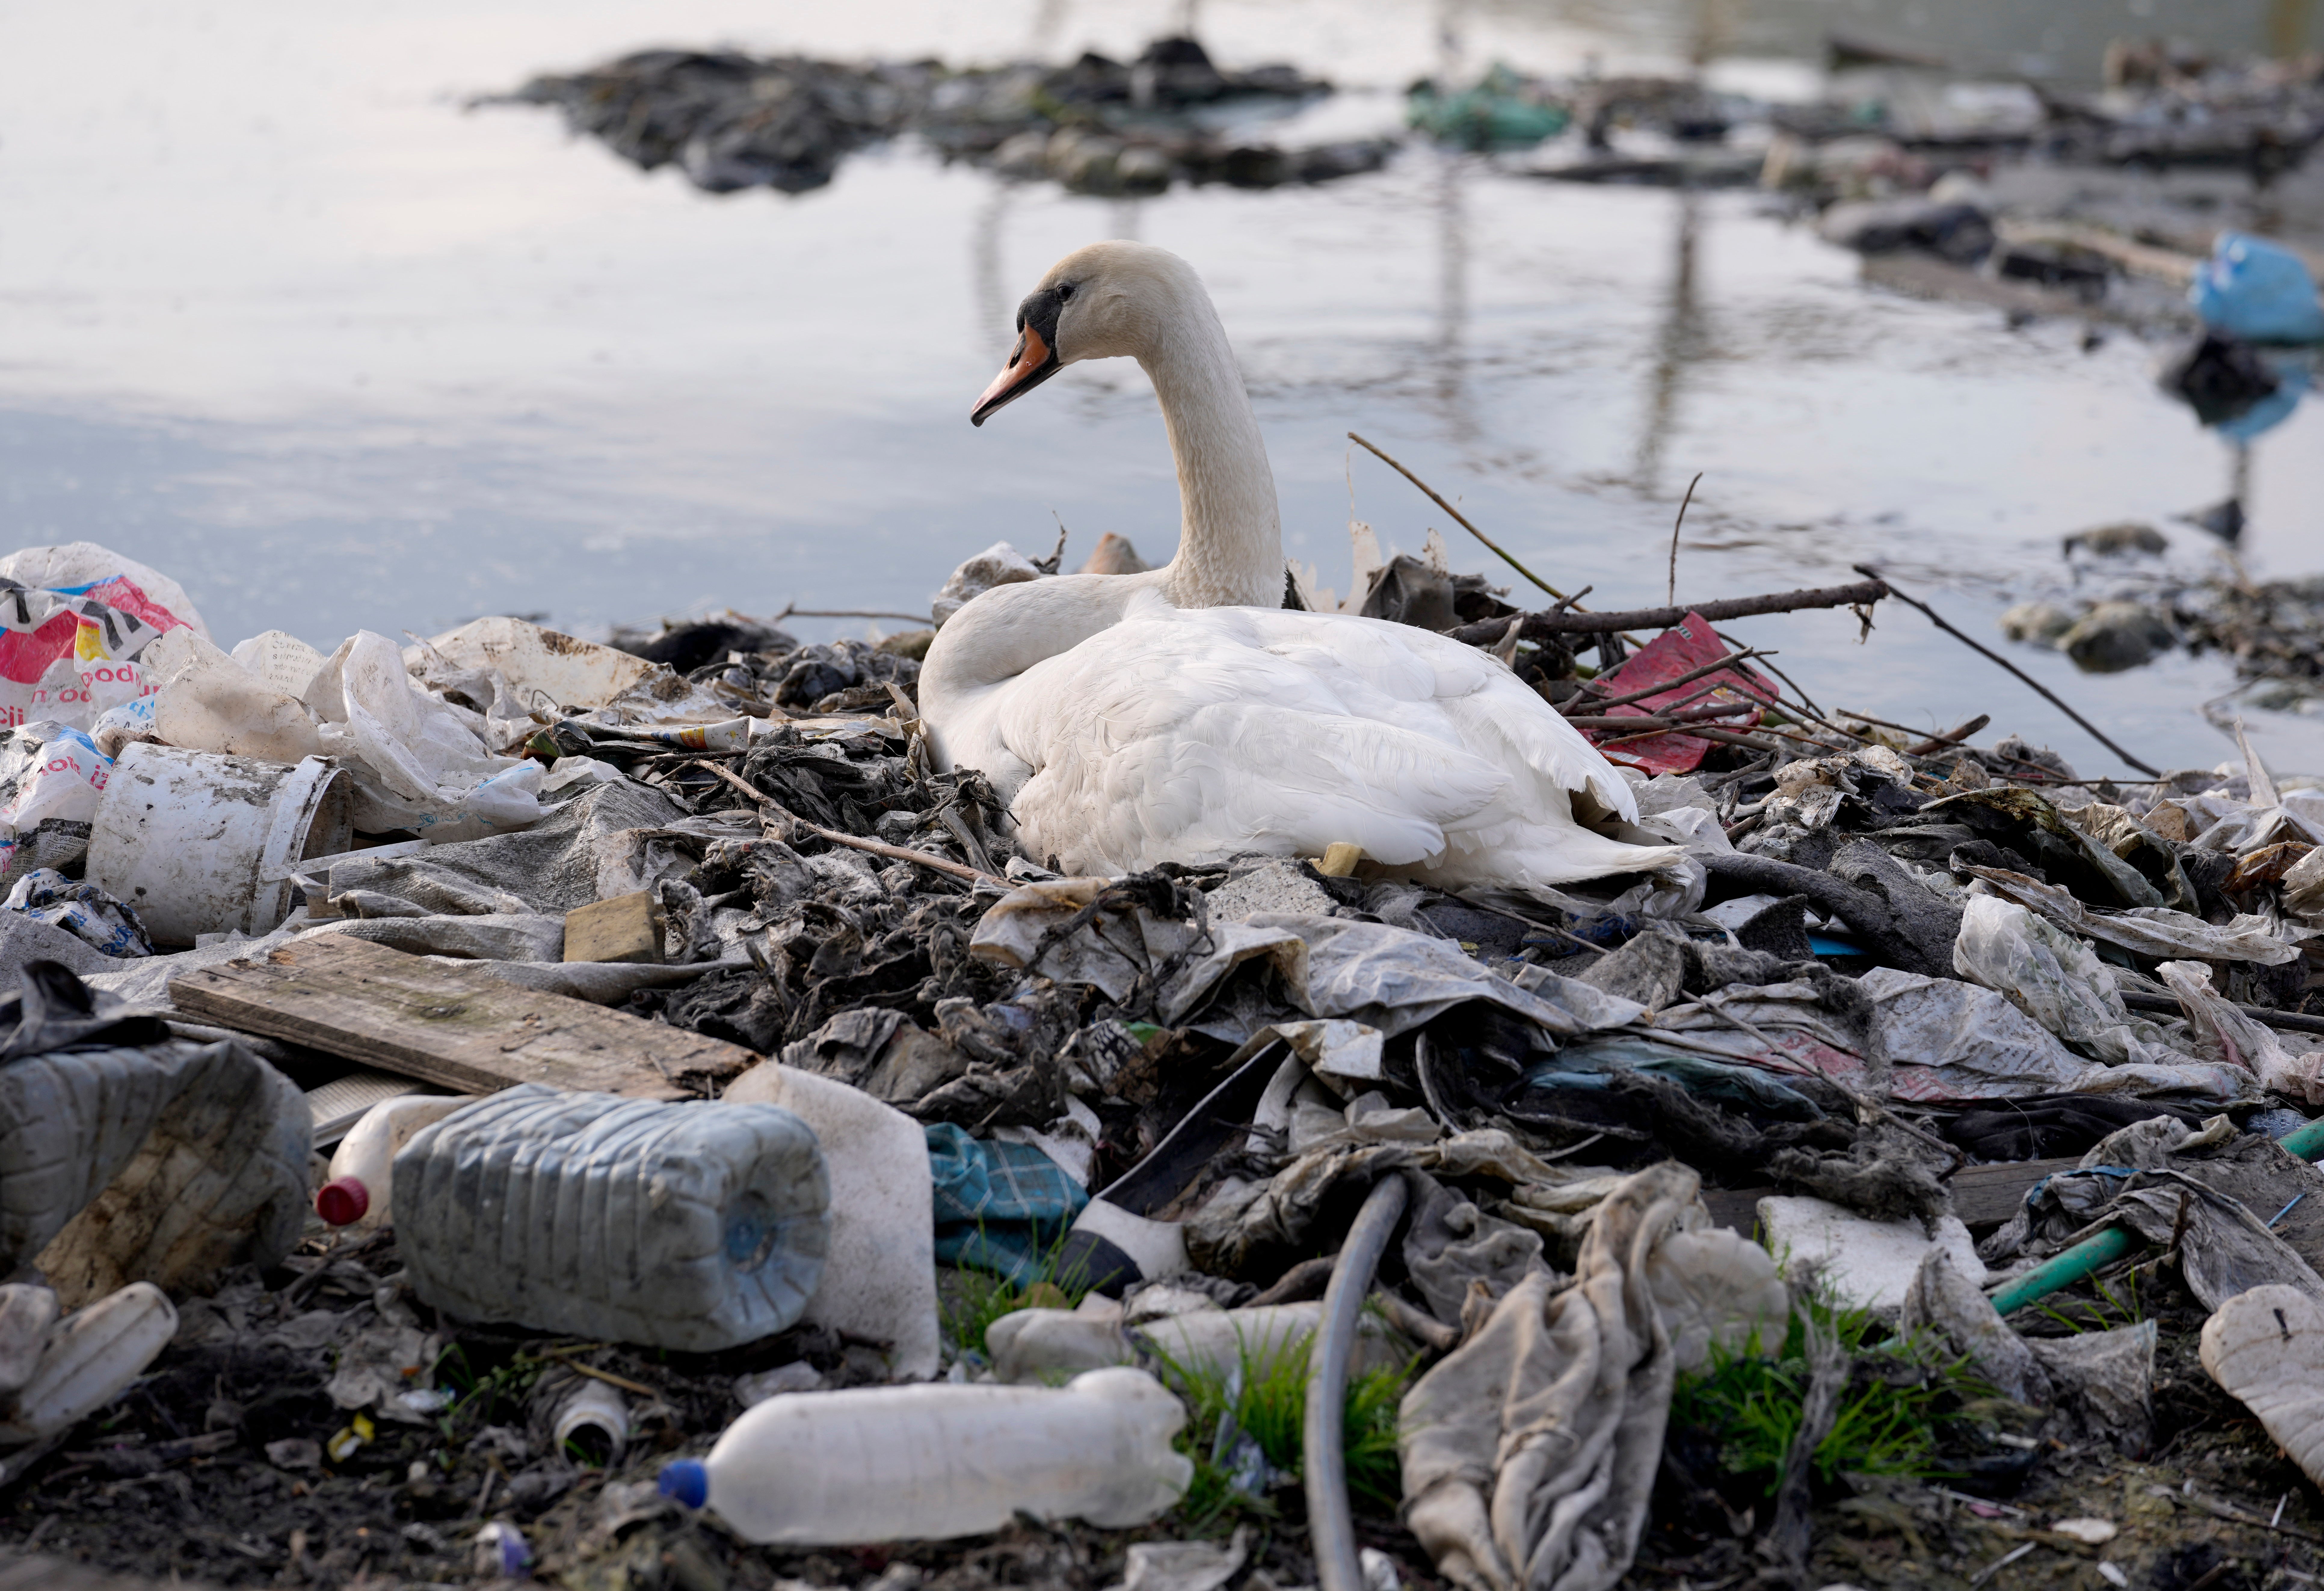 ‘Even if we recycled better and tried to manage the waste as much as we can, we would still release more than 17 million tons of plastic per year into nature,’ scientist says